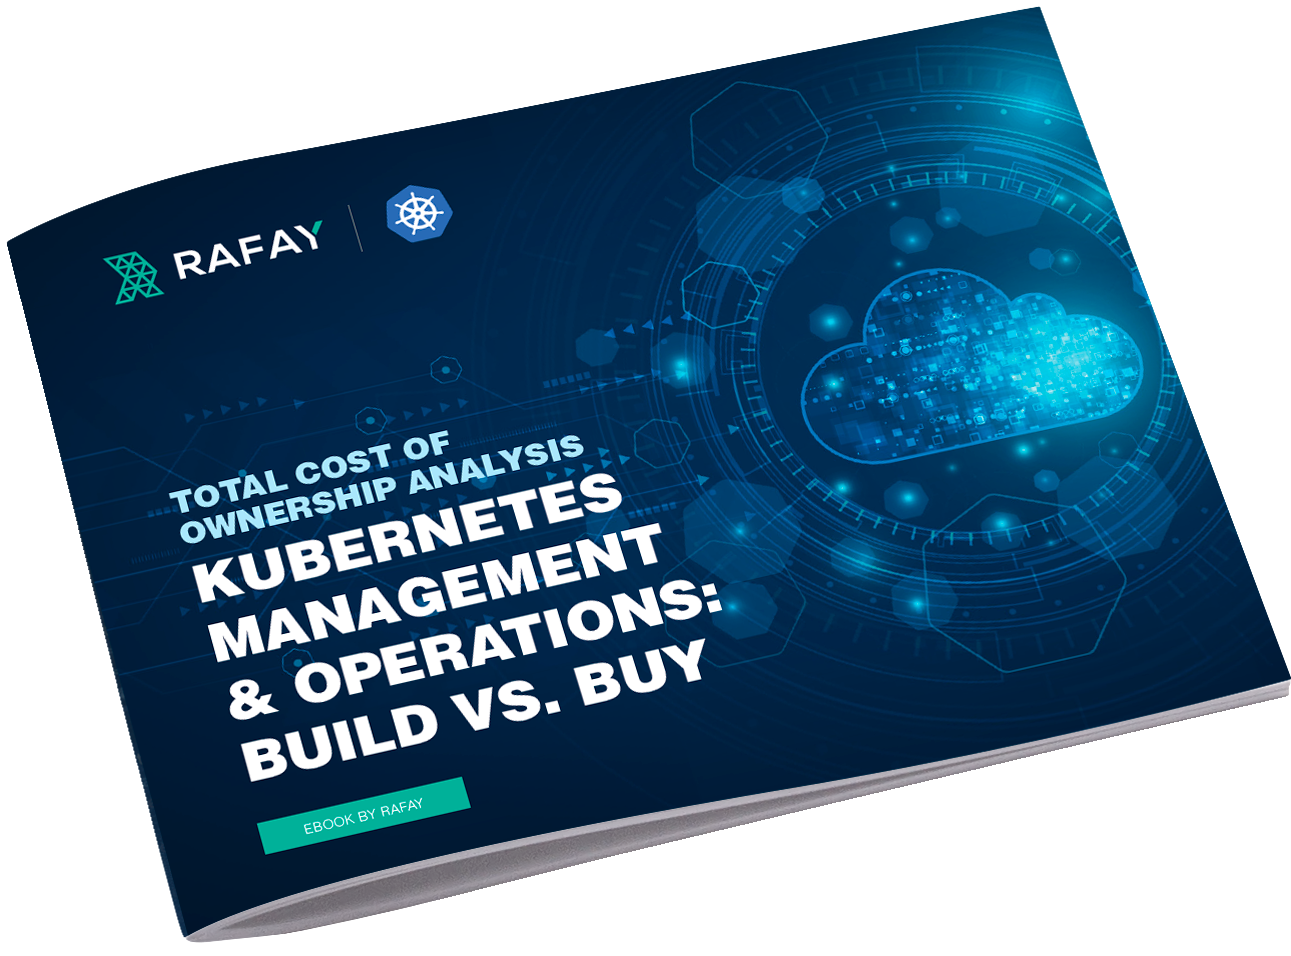 image for Build vs. Buy: Total Cost of Ownership Analysis Kubernetes Management & Operations